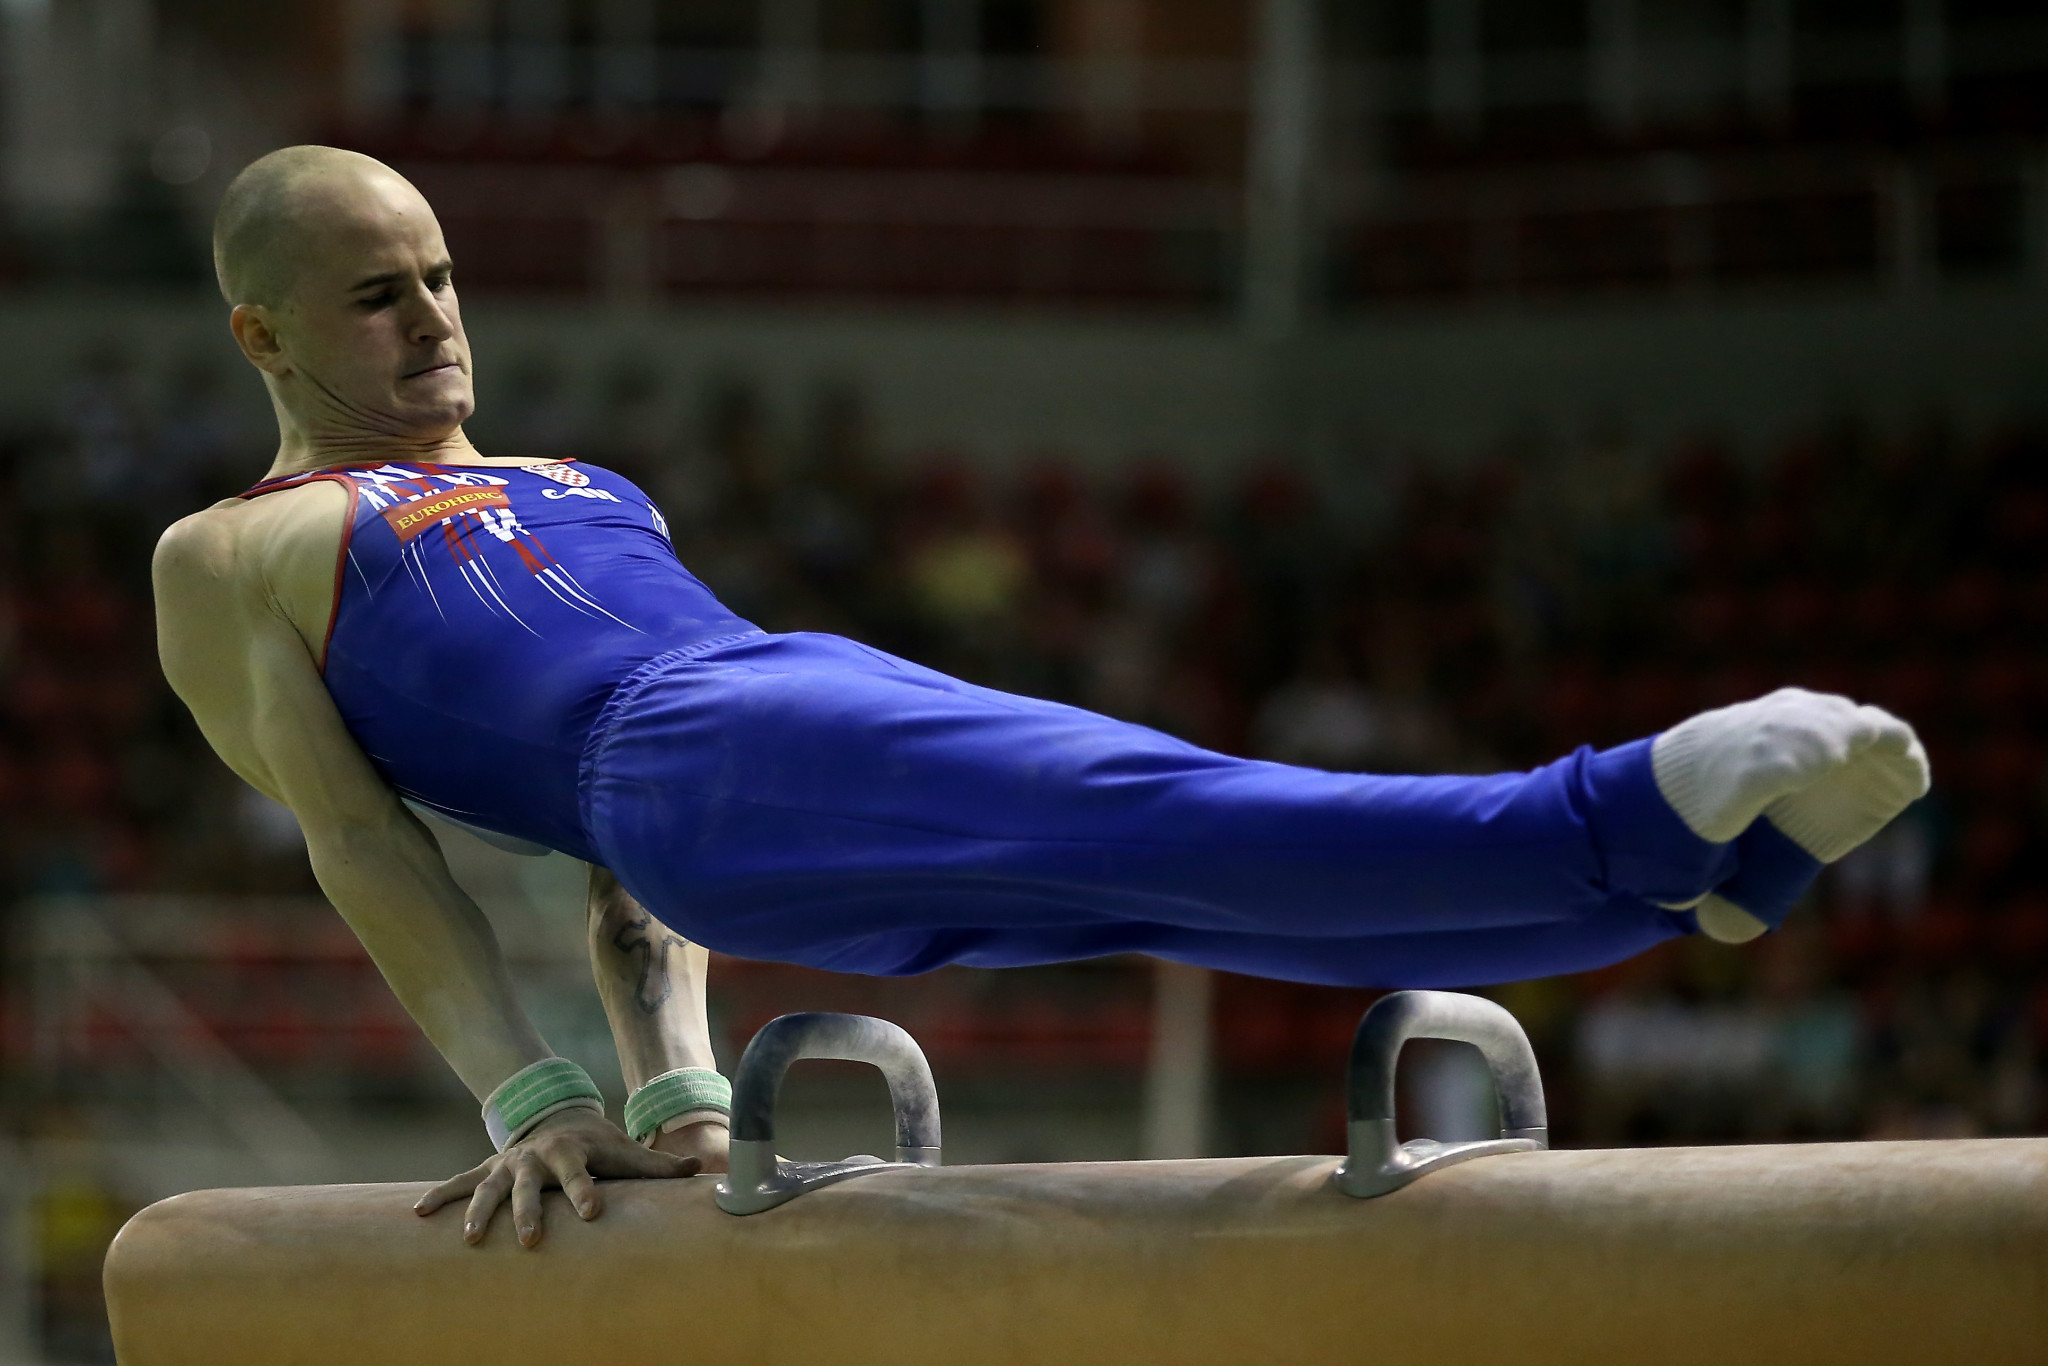 Croatia's Beijing 2008 Olympic silver medallist Filip Ude triumphed in the men's pommel horse final at the FIG Apparatus World Cup in Cottbus ©Getty Images